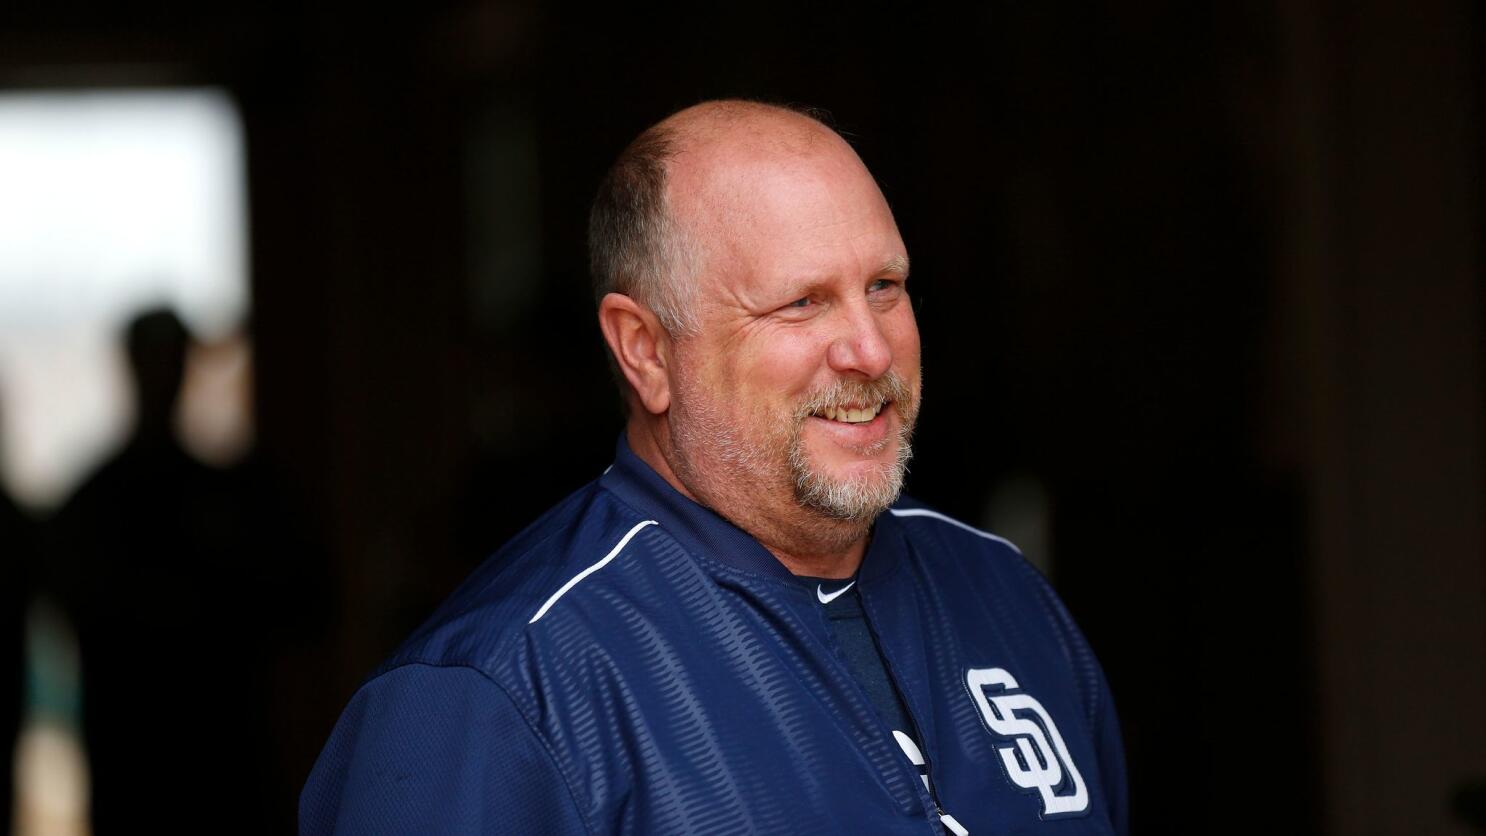 Matt Stairs keeping it simple, positive as latest Padres hitting coach -  The San Diego Union-Tribune